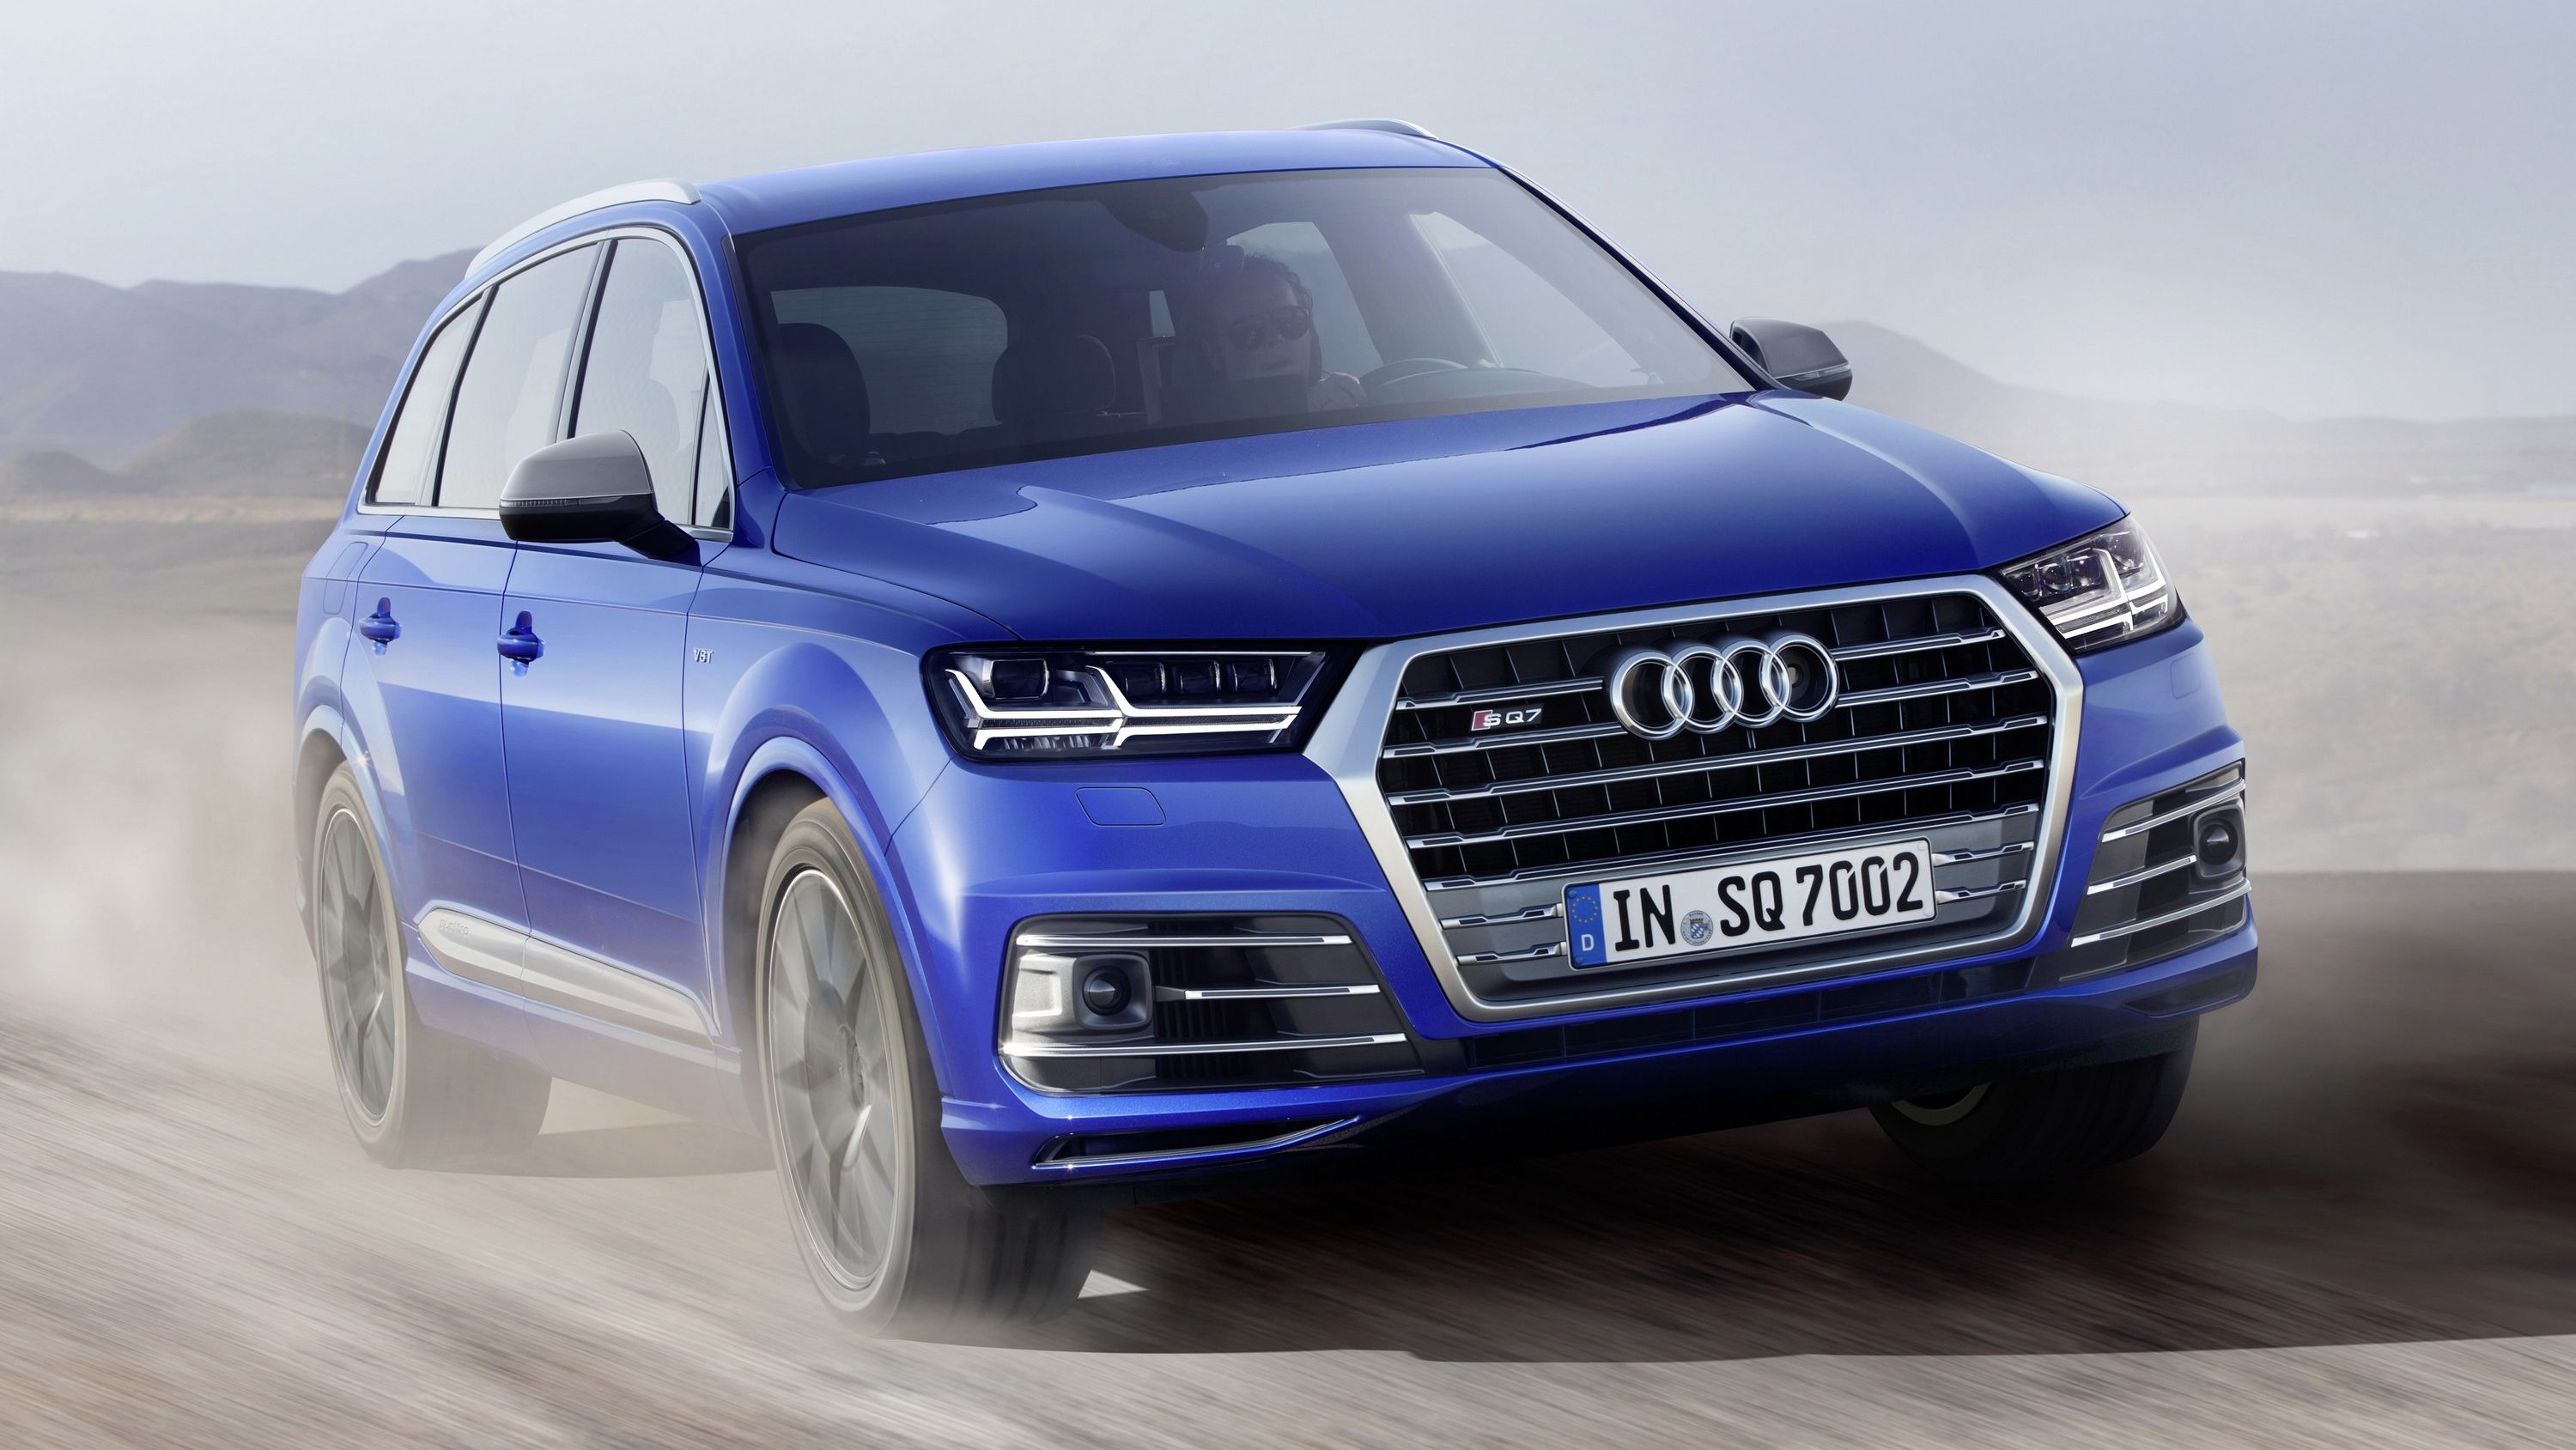 2016 Loren Angelo Talks About The Audi SQ7 And Its Role In The Next Captain America Film